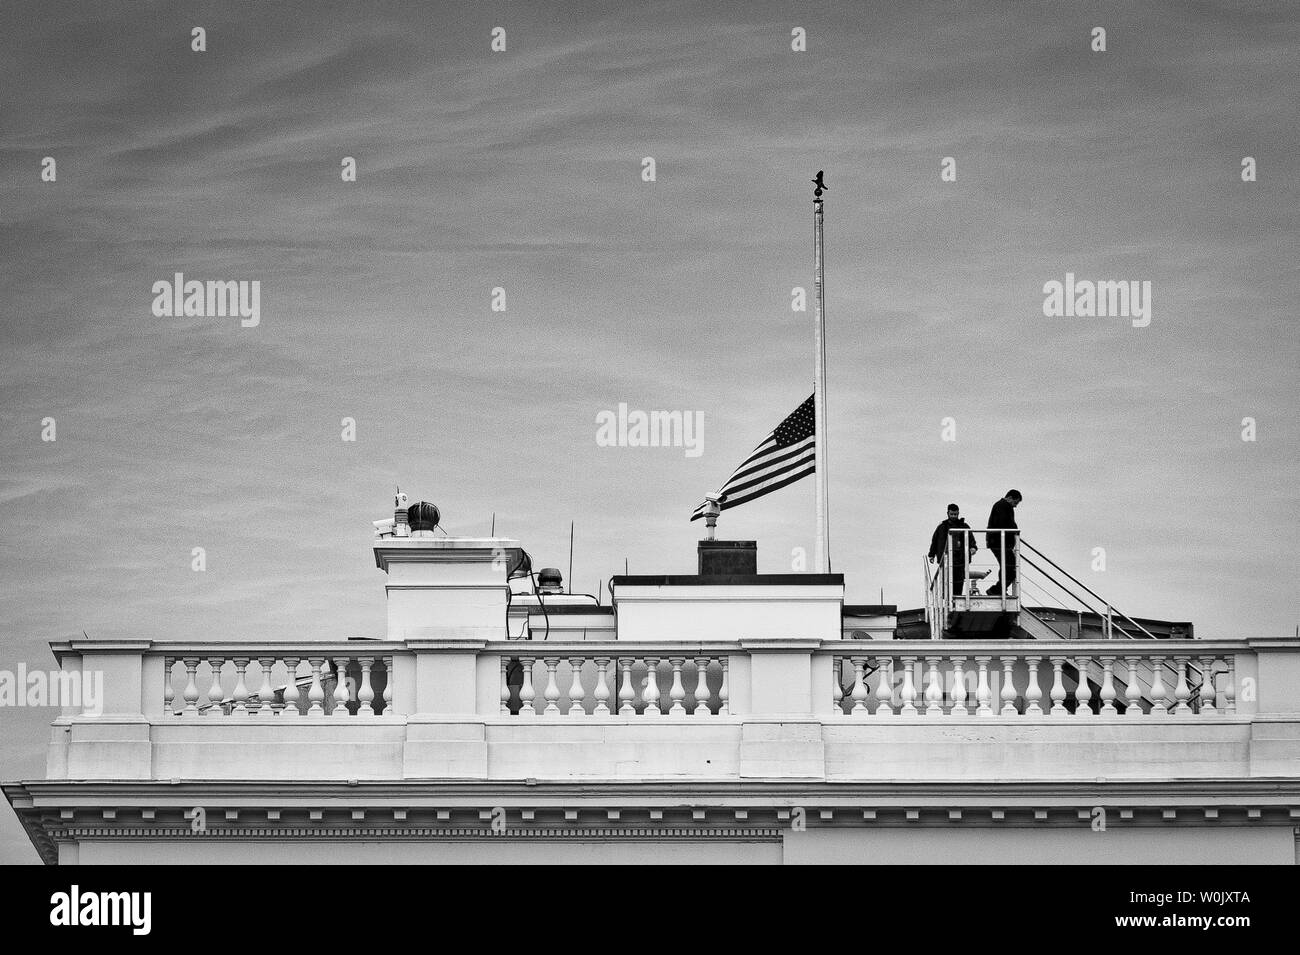 Staff members leave the roof of the White House after lowering the flag to half staff to honor the victims of the recent high school mass shooting in Florida on February 15, 2018 in Washington, DC. The suspect, Nikolas Cruz, 19, gunned down students and teachers at Marjory Stoneman Douglas High School in Parkland, Fla., killing 17 and wounding many more..        Photo by Pete Marovich/UPI Stock Photo